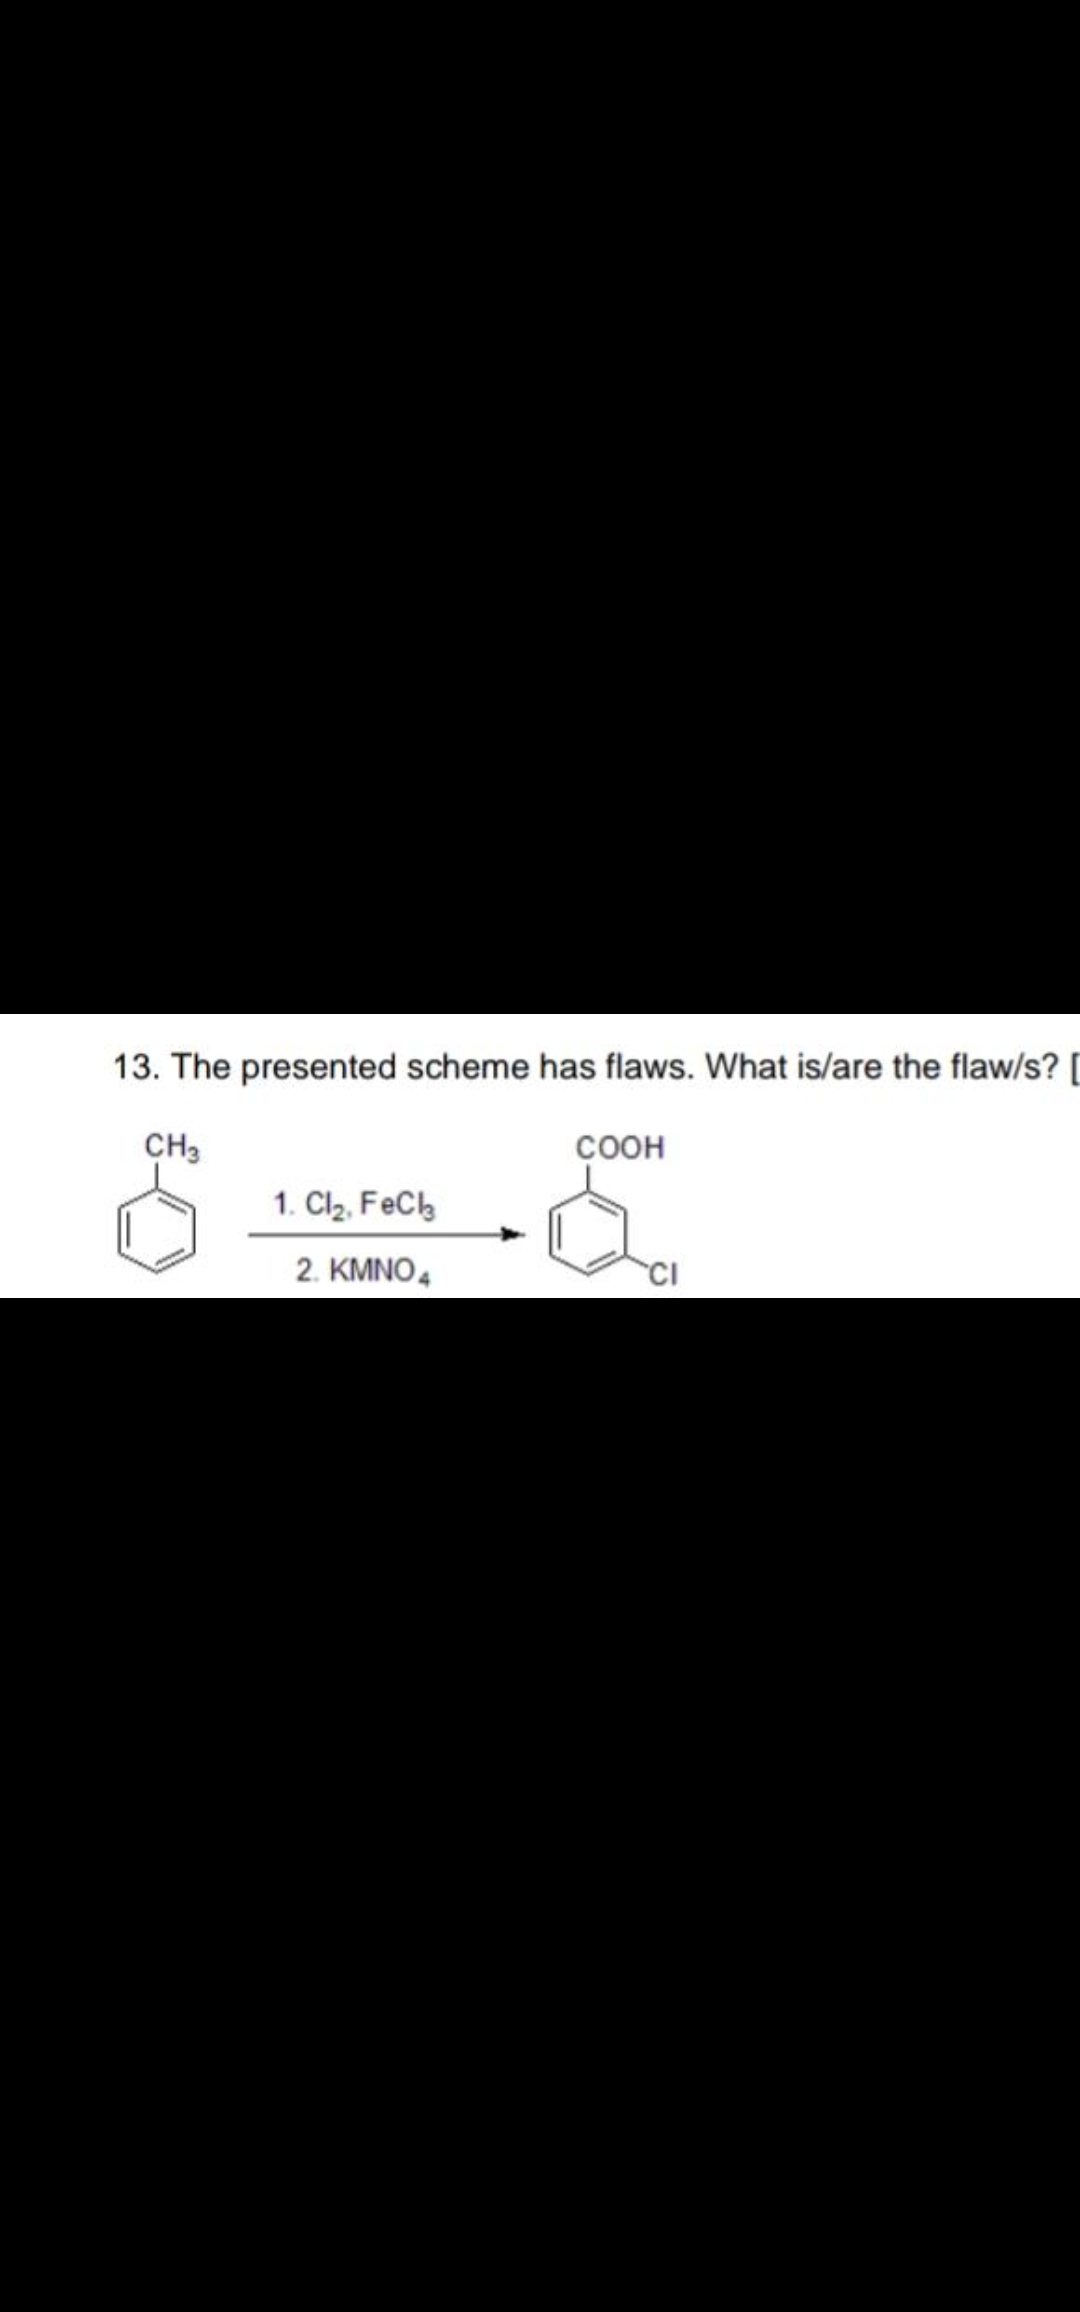 13. The presented scheme has flaws. What is/are the flaw/s? [
CH3
соон
1. Clz, FeCh
2. KMNO4
